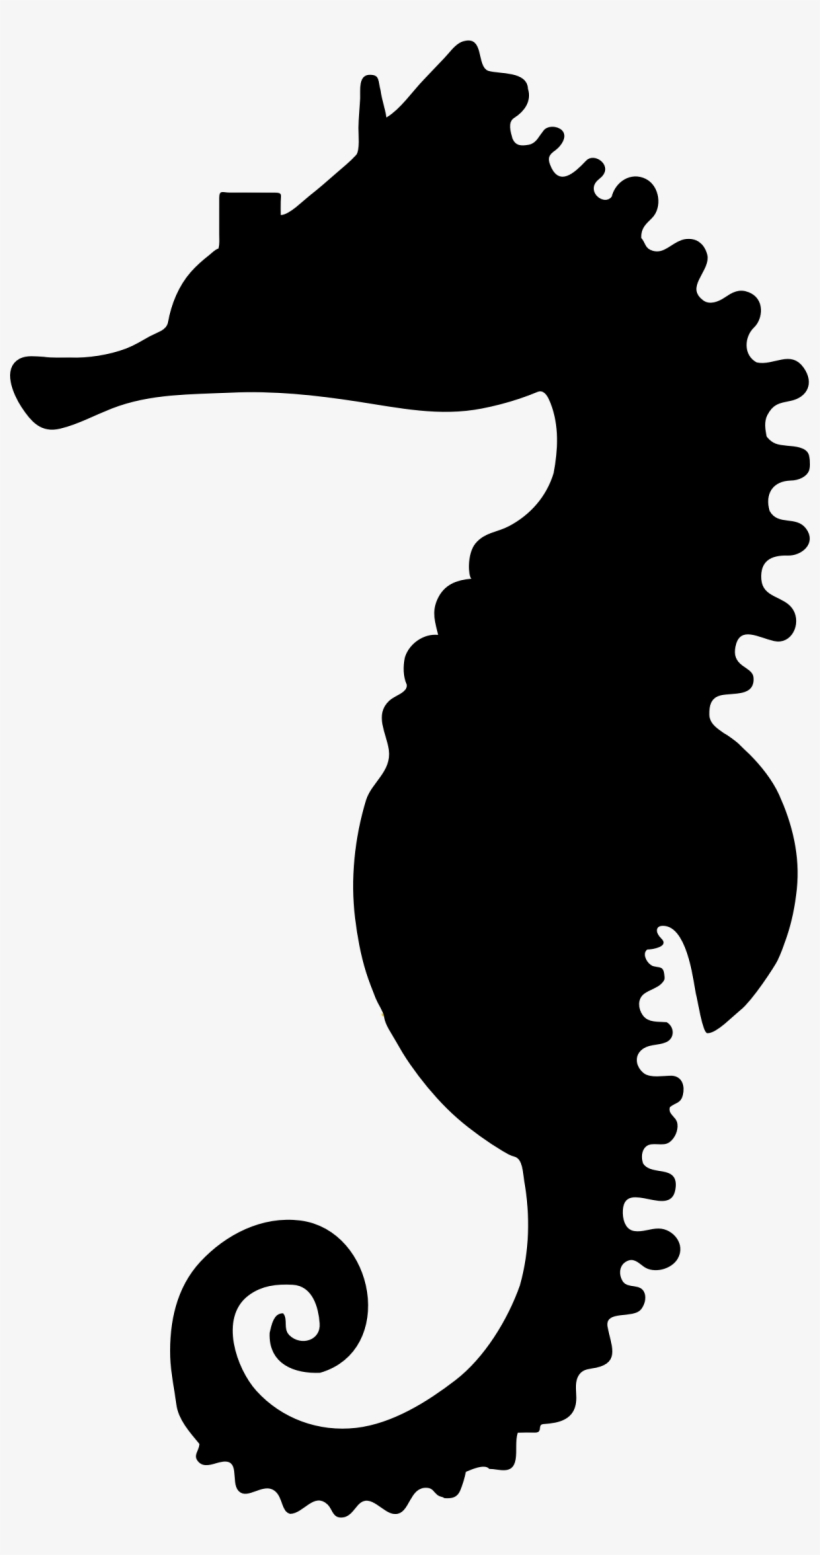 Seahorse Png - Seahorse Silhouette Png, transparent png #1952630